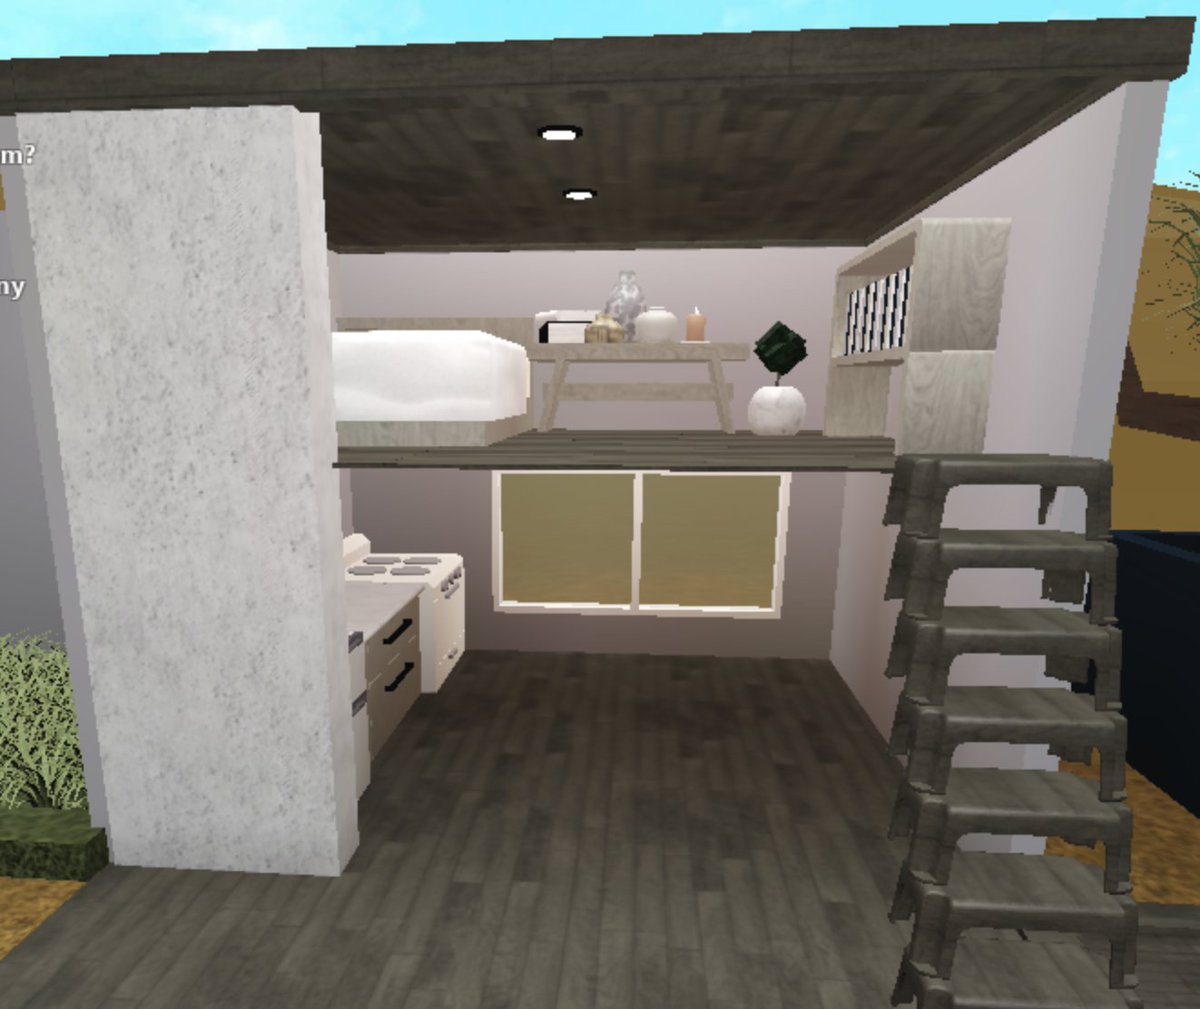 Fvqutzsmzjhnkm - how to make stairs in roblox welcome to bloxburg the hacked